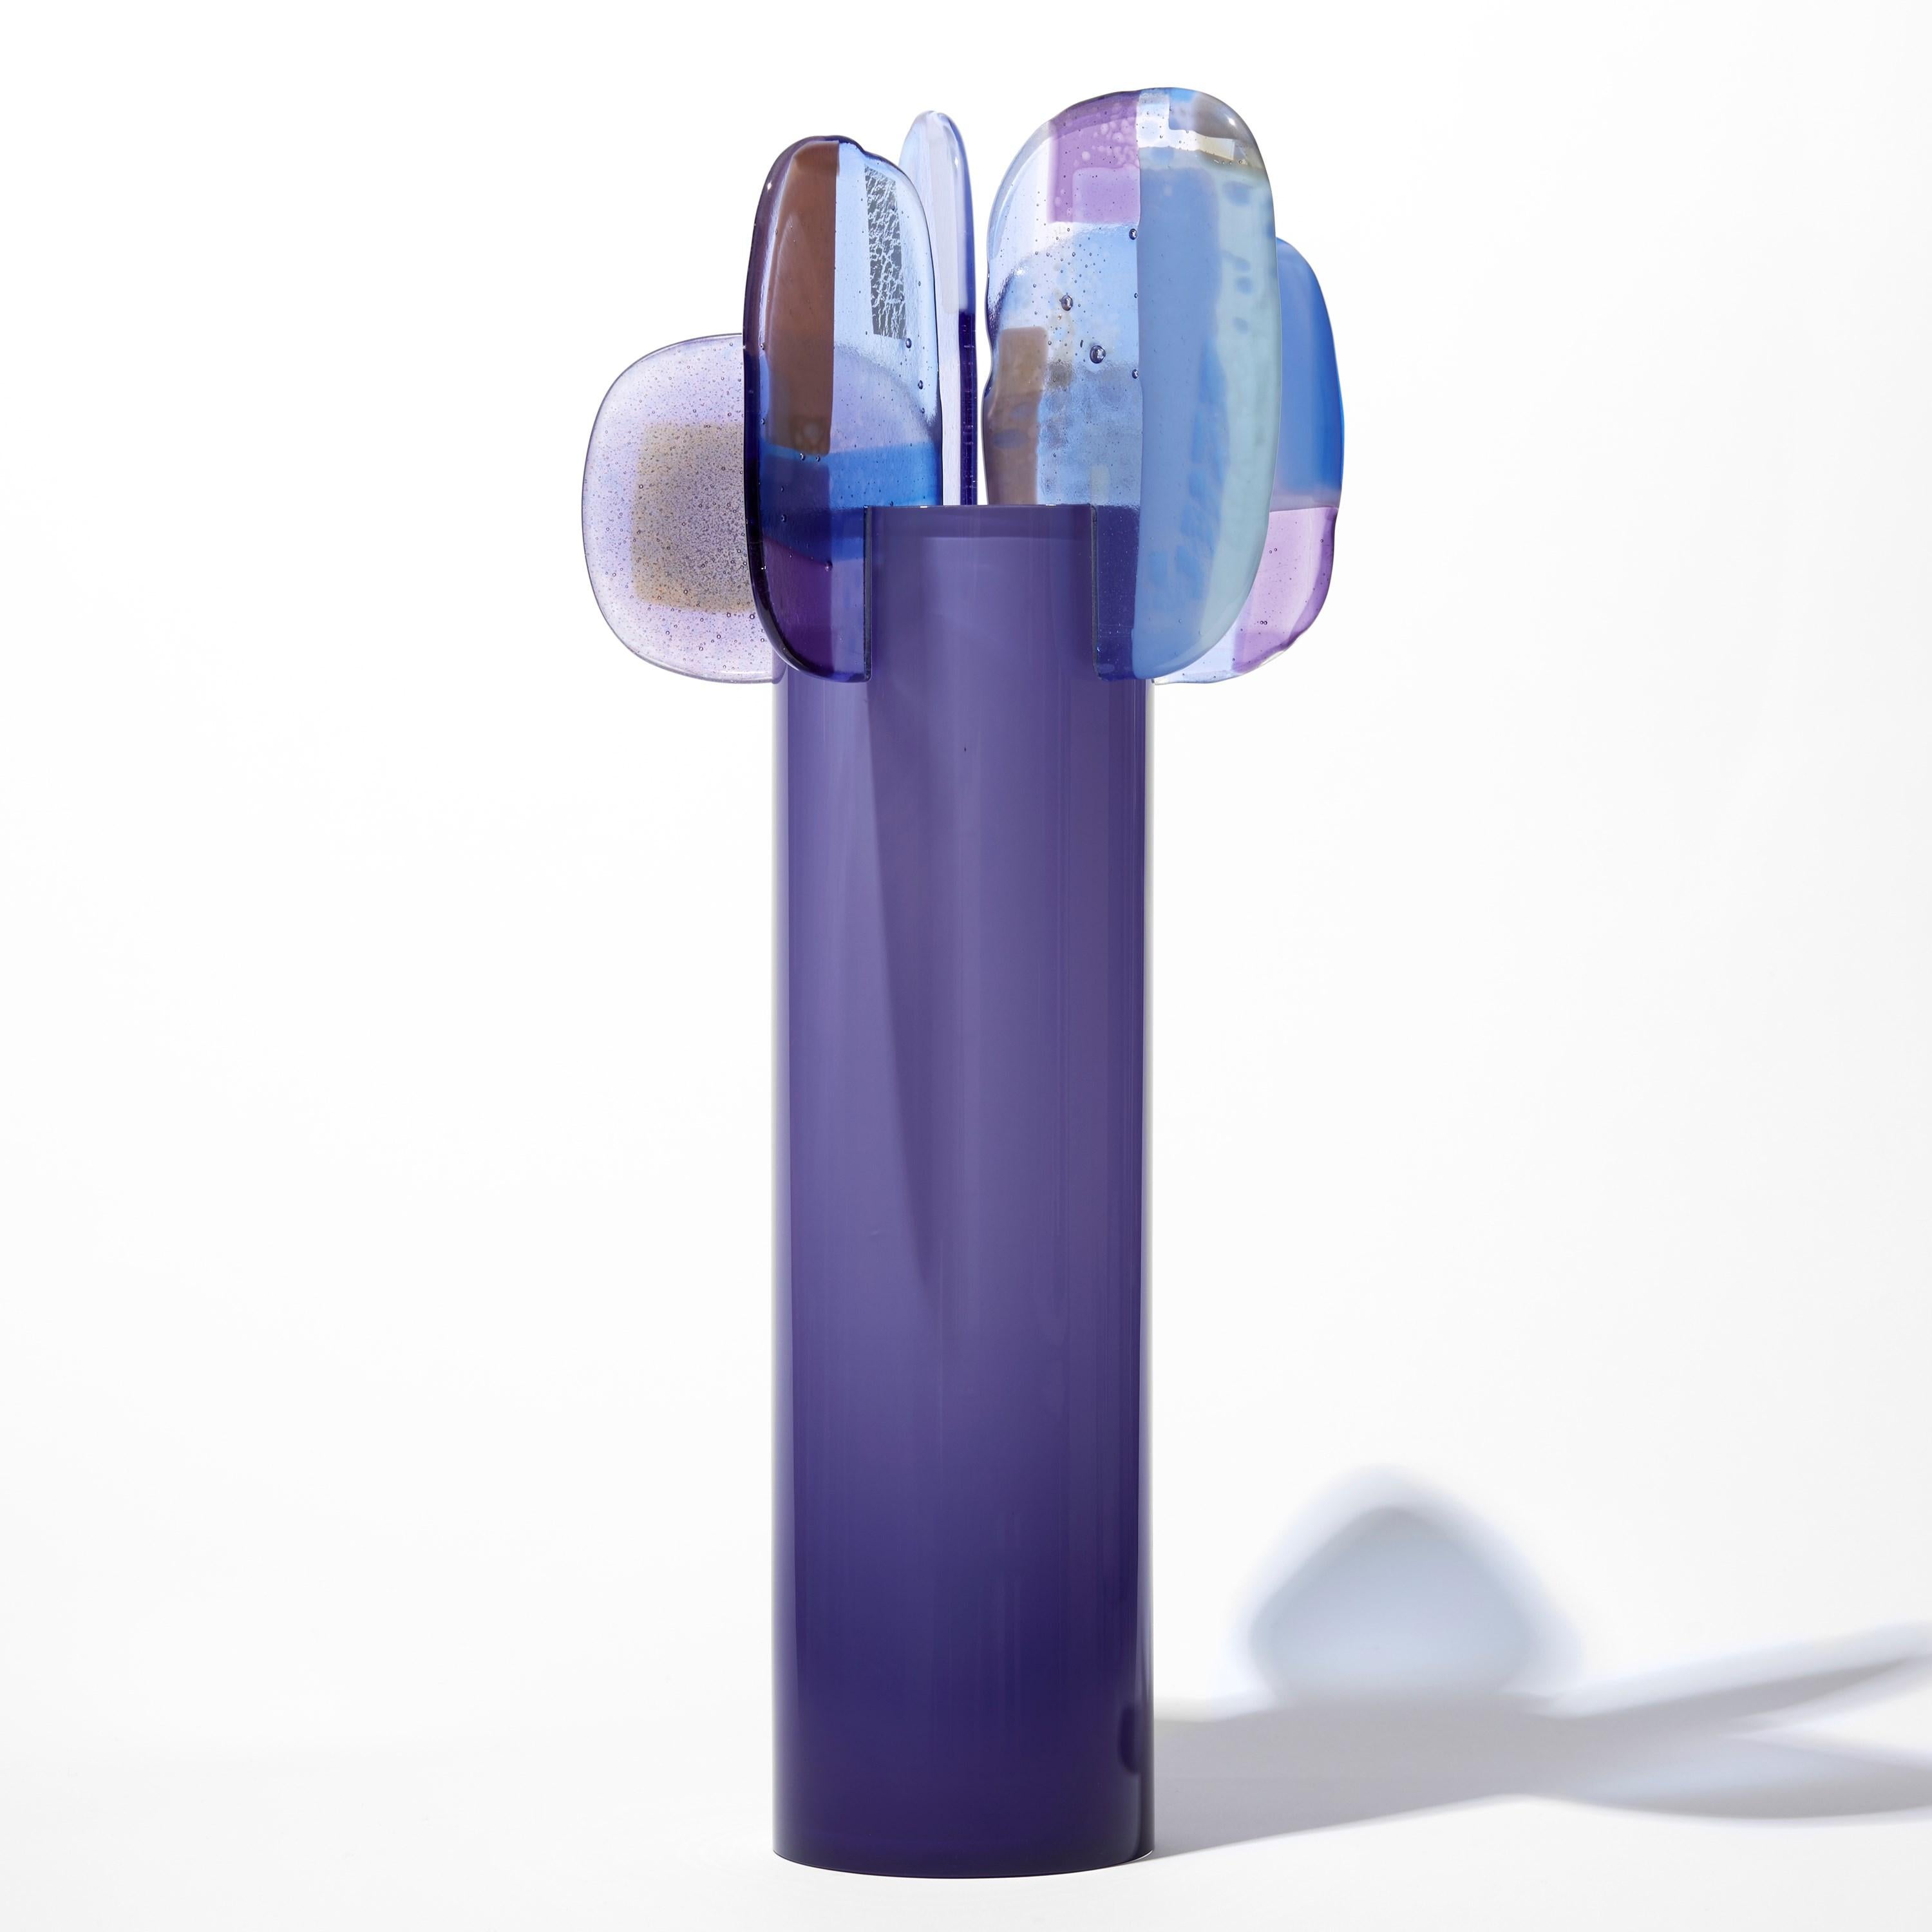 British Paradise 08 in Amethyst, a purple, blue & mauve glass sculpture by Amy Cushing